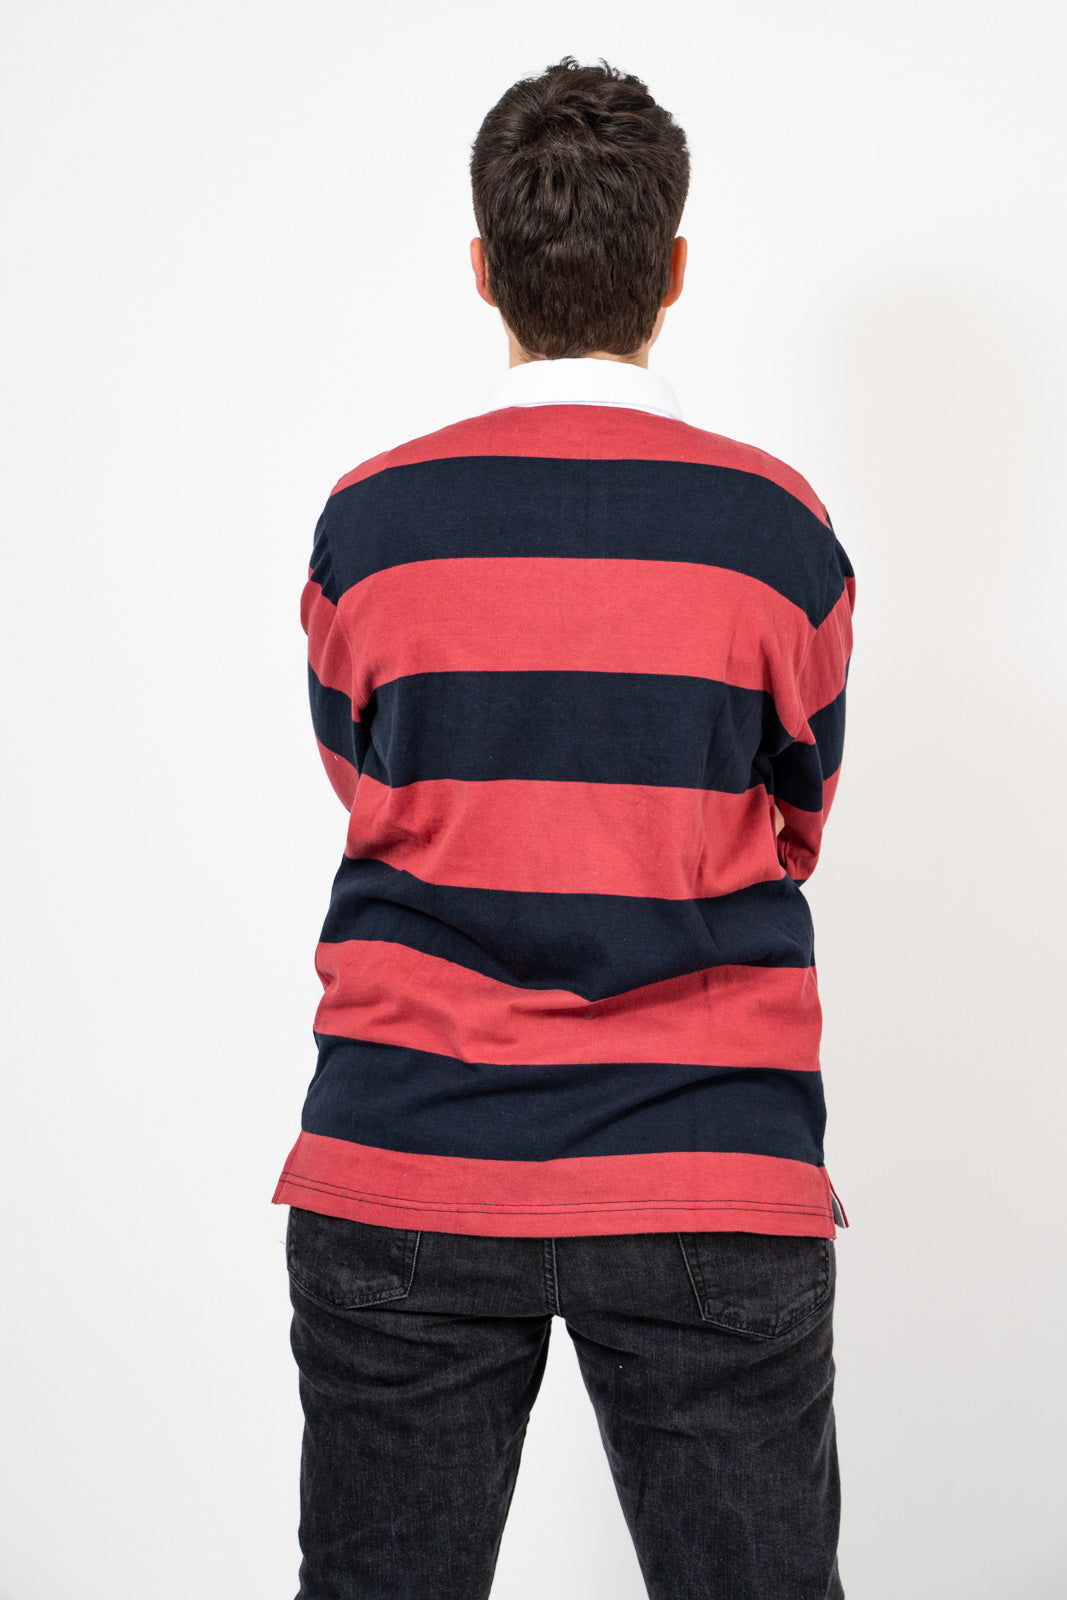 Red and Navy Rugby Shirt